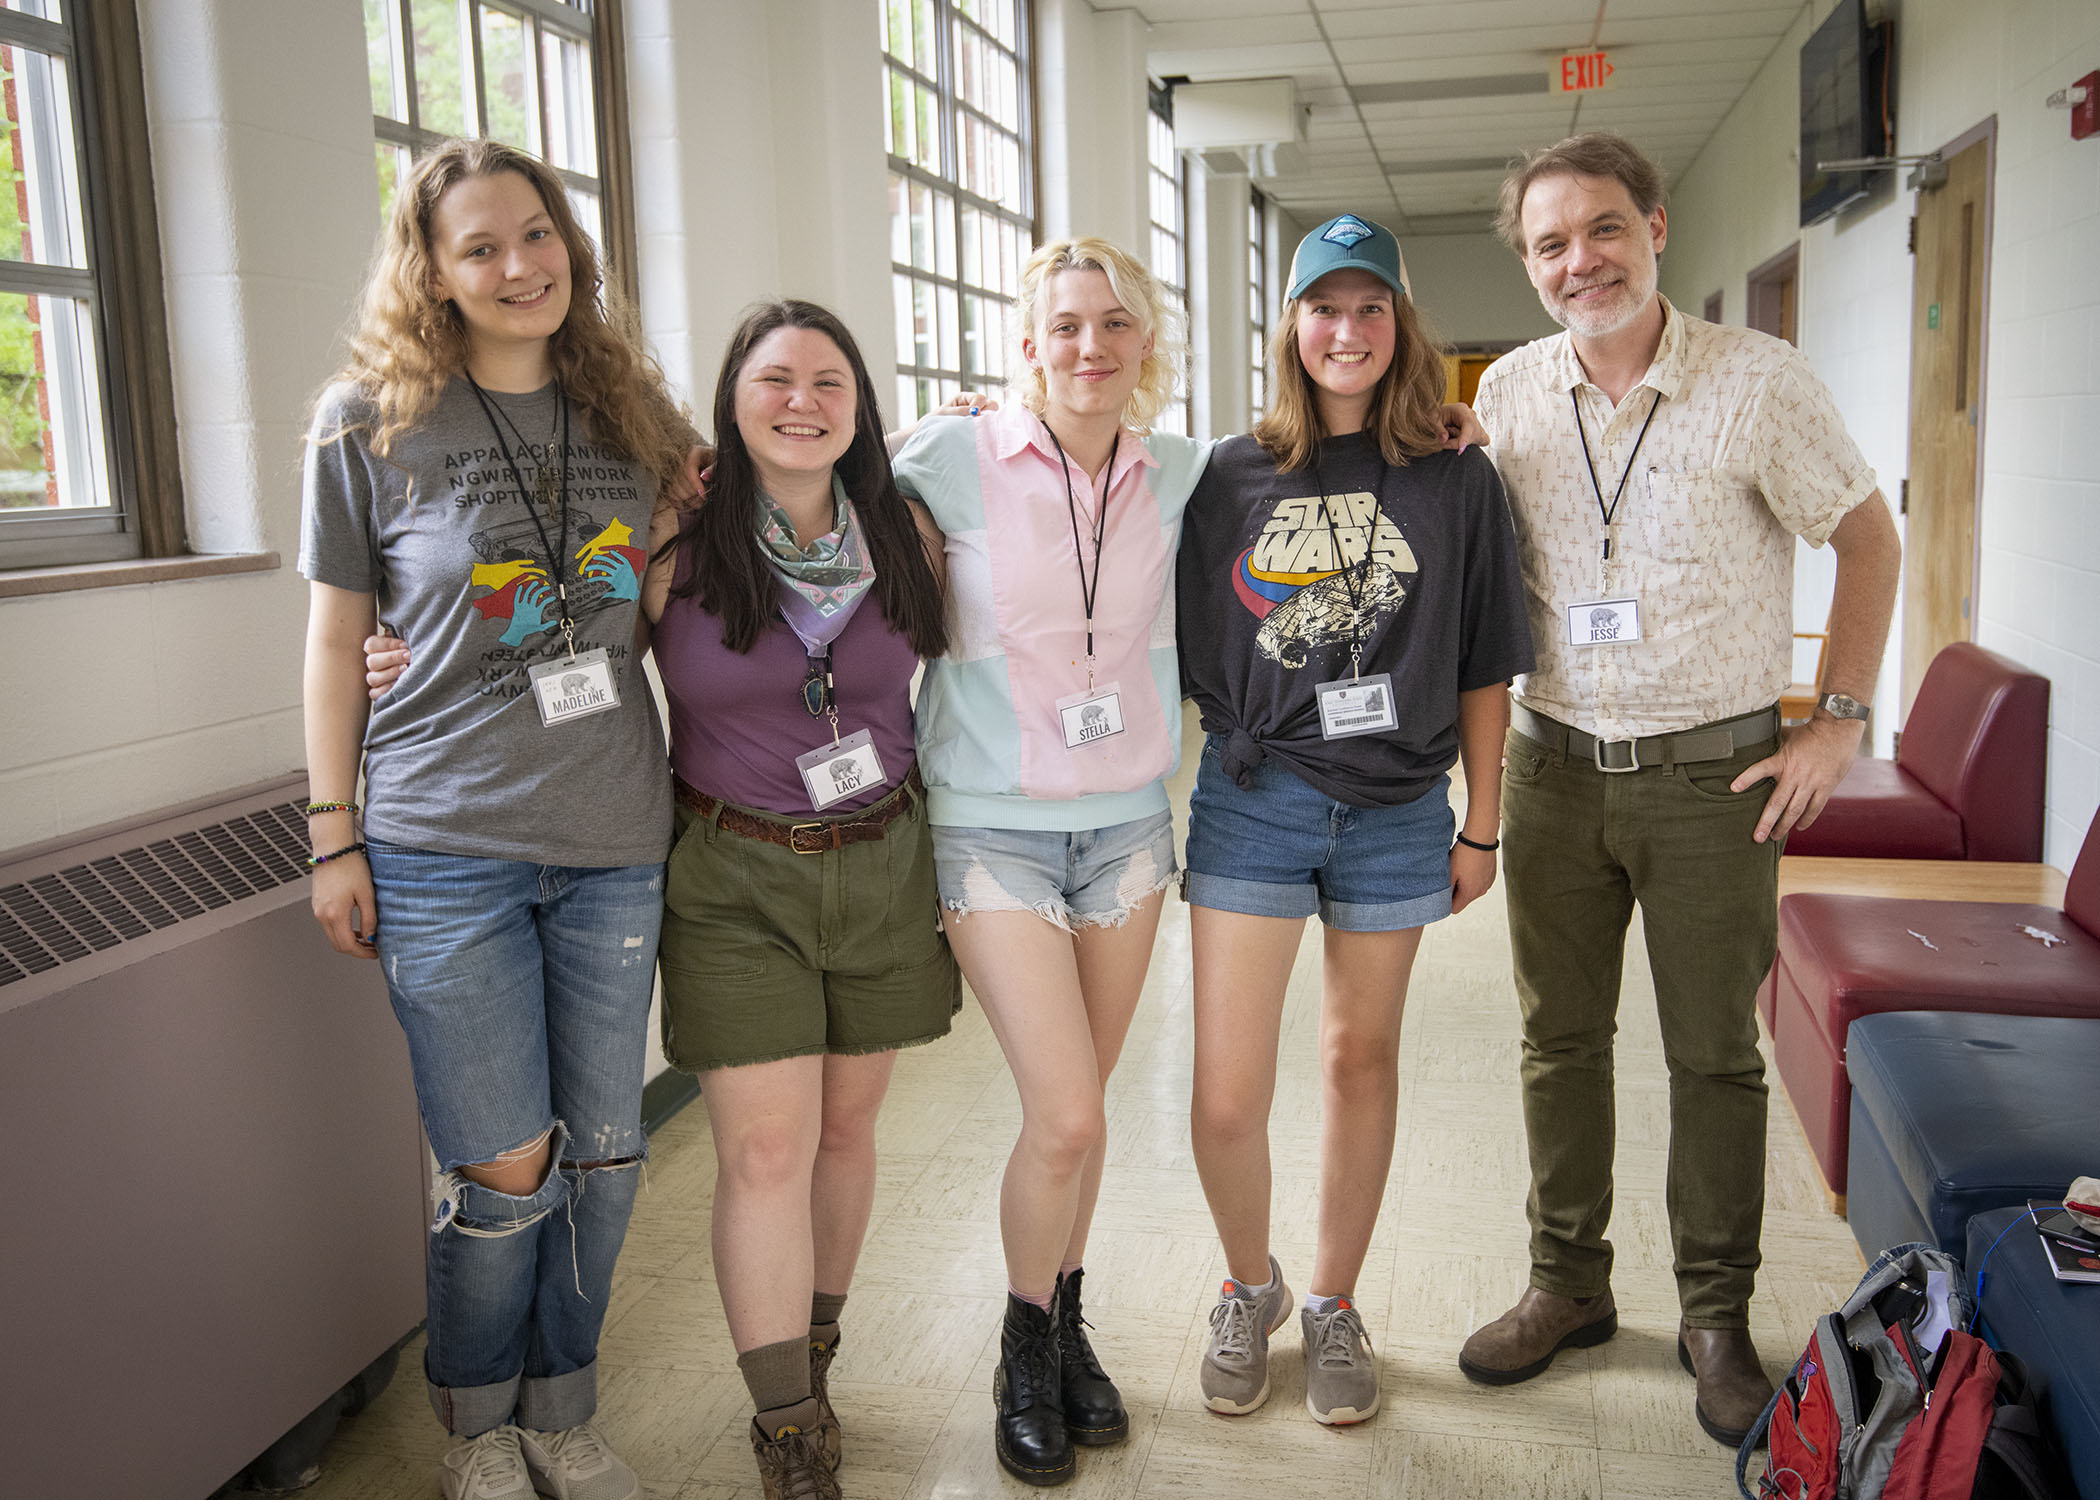 Some of the 2022 Young Writers' Workshop staff from left to right: Madeline Rodenberg, Lacy Snapp, Stella Rodenberg, AK Stites, and Dr. Jesse Graves.  